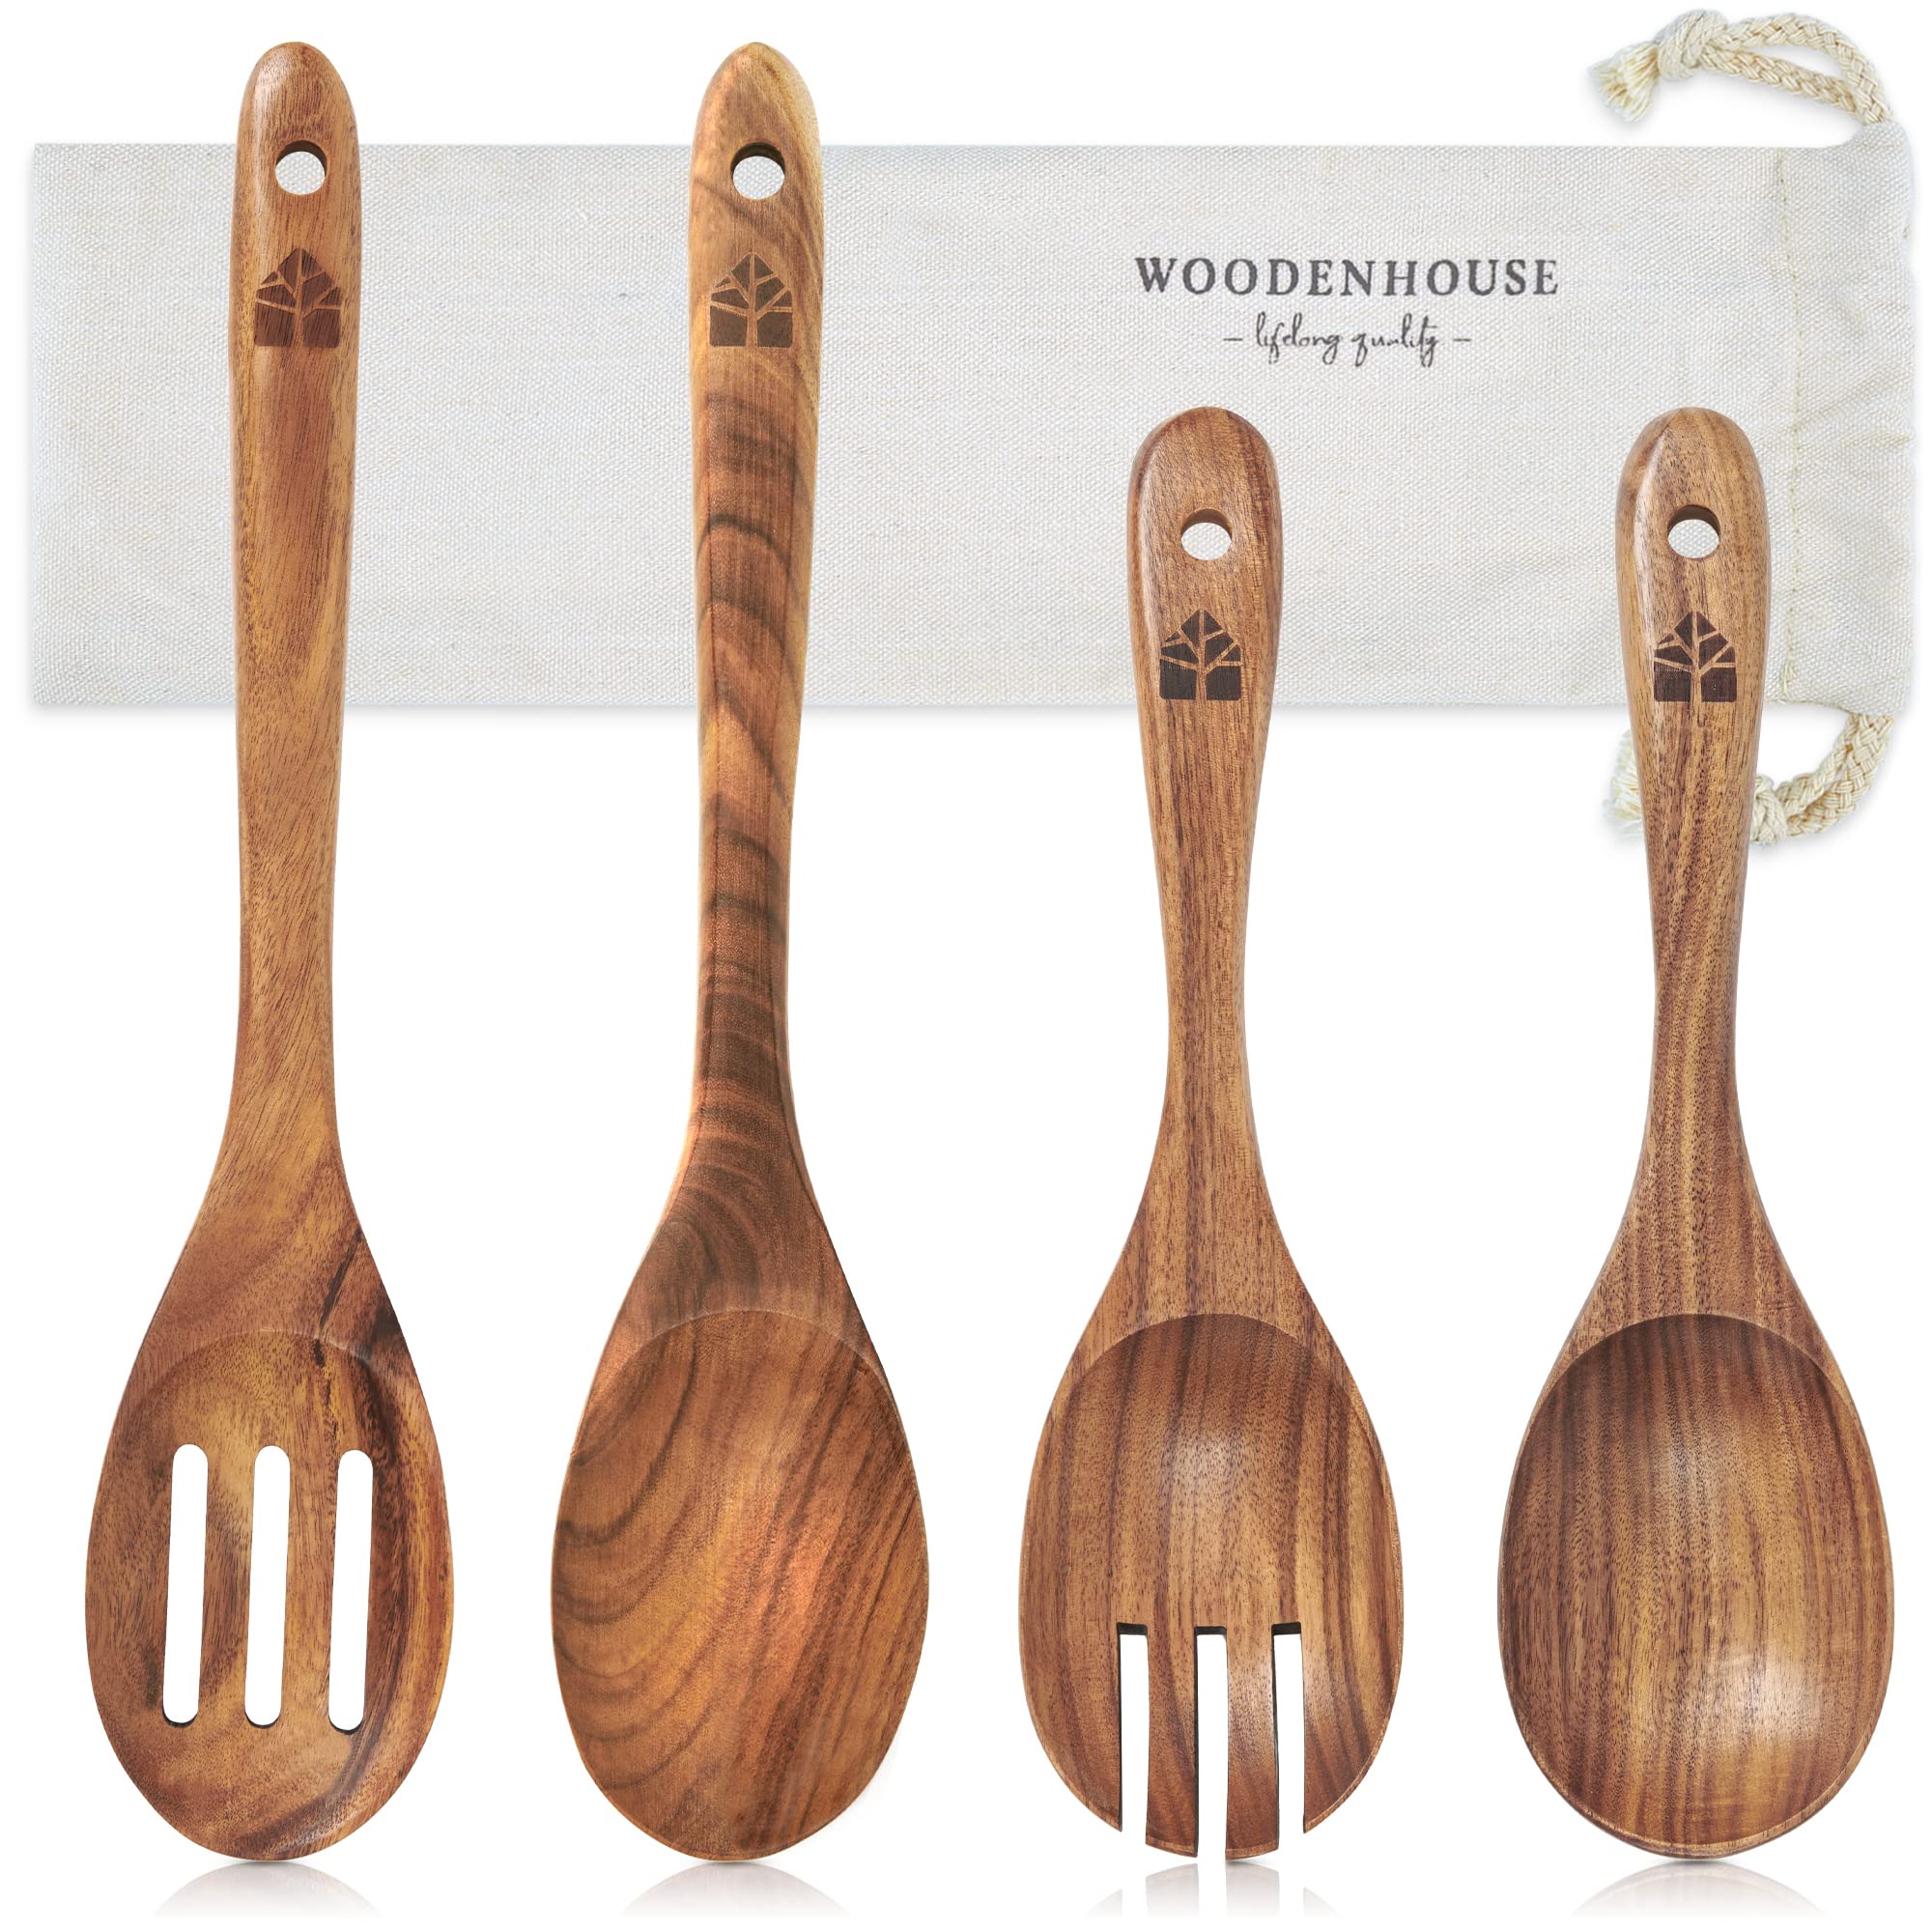  Wooden Spoons for Cooking – Wooden Utensils for Cooking Set  with Holder, Spoon Rest & Hanging Hooks, Teak Wood Nonstick Kitchen  Cookware – Durable Set of 8pcs by Woodenhouse : Home & Kitchen